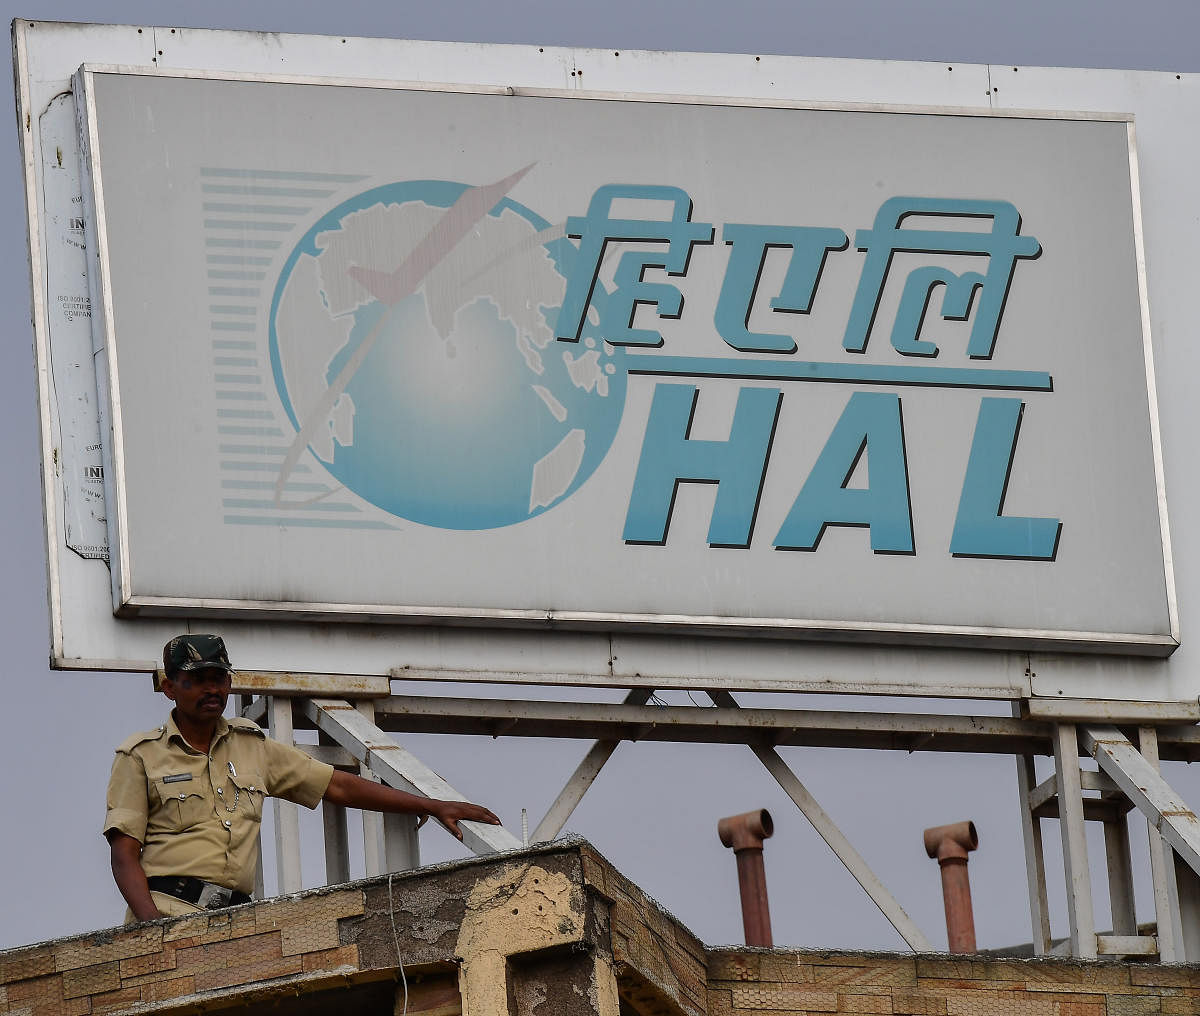 HAL owes more than Rs 800 crore to contractors